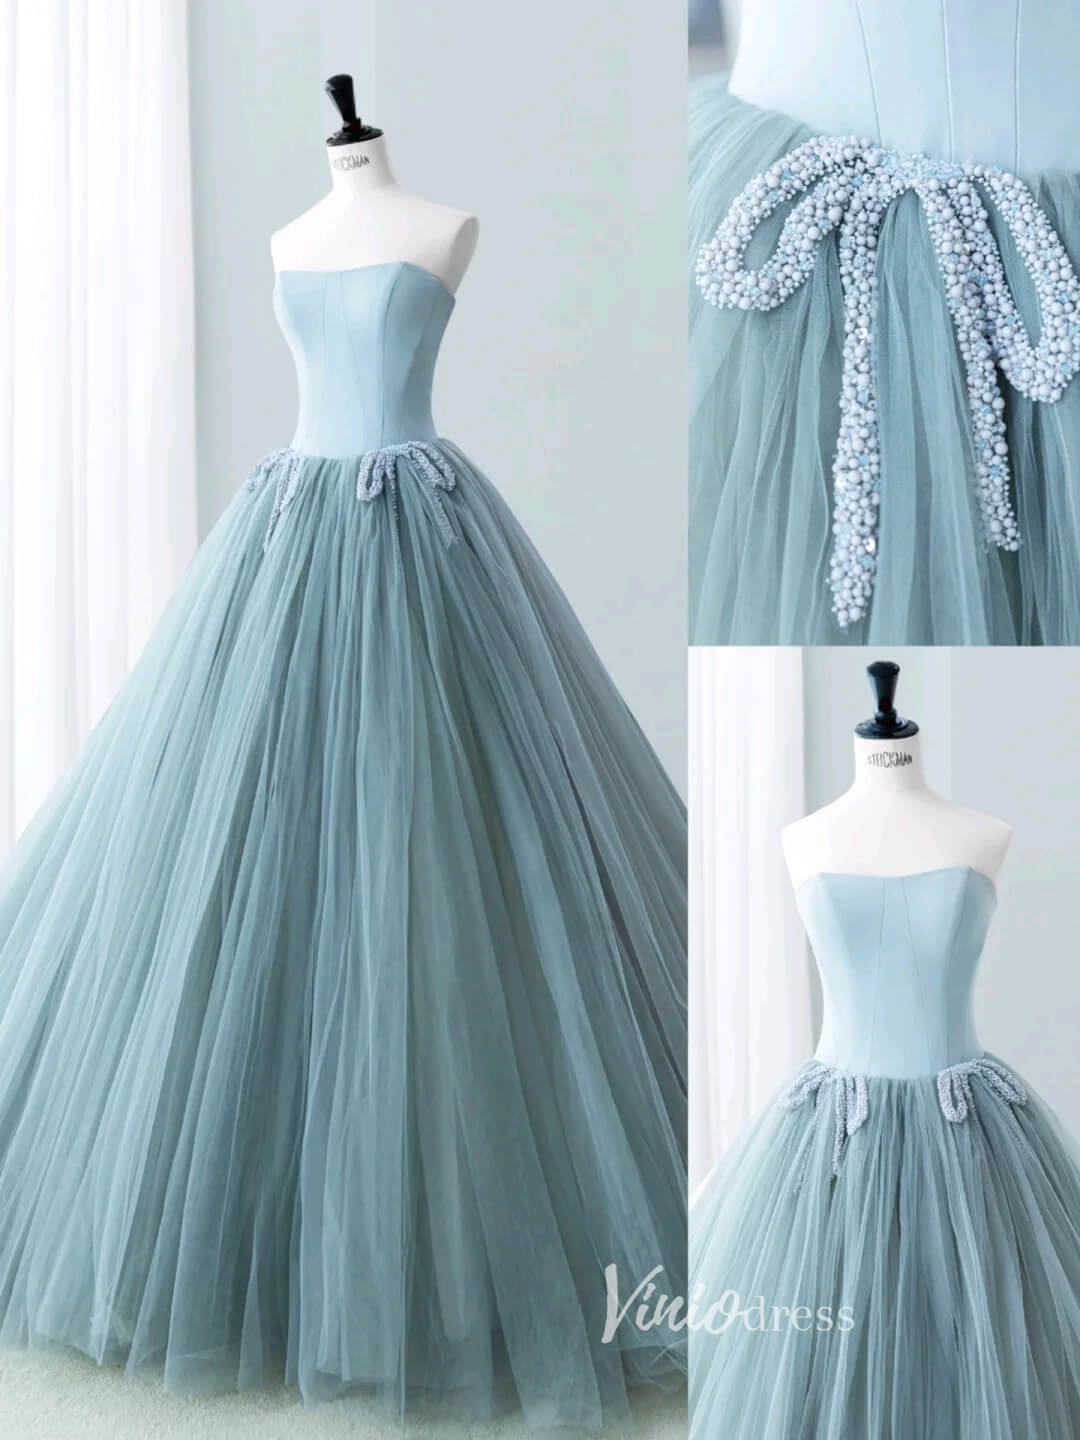 Dusty Blue Strapless Prom Dresses Pleated Tulle Formal Dress AD1036-prom dresses-Viniodress-Viniodress